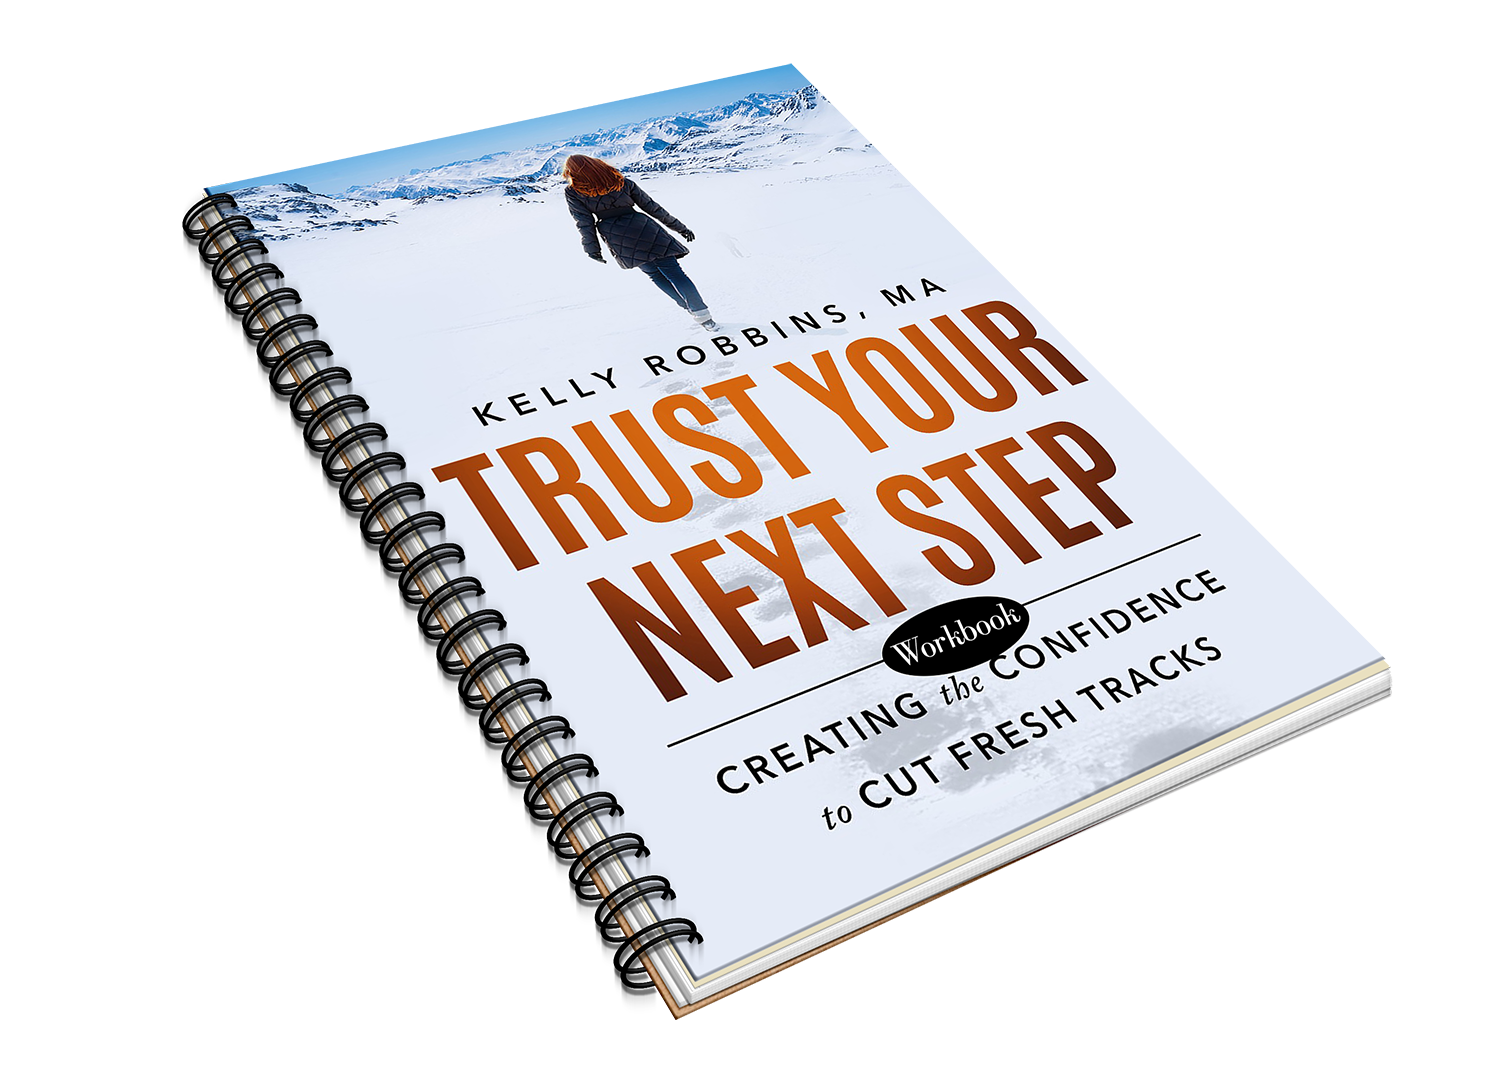 Trust Your Next Step Book